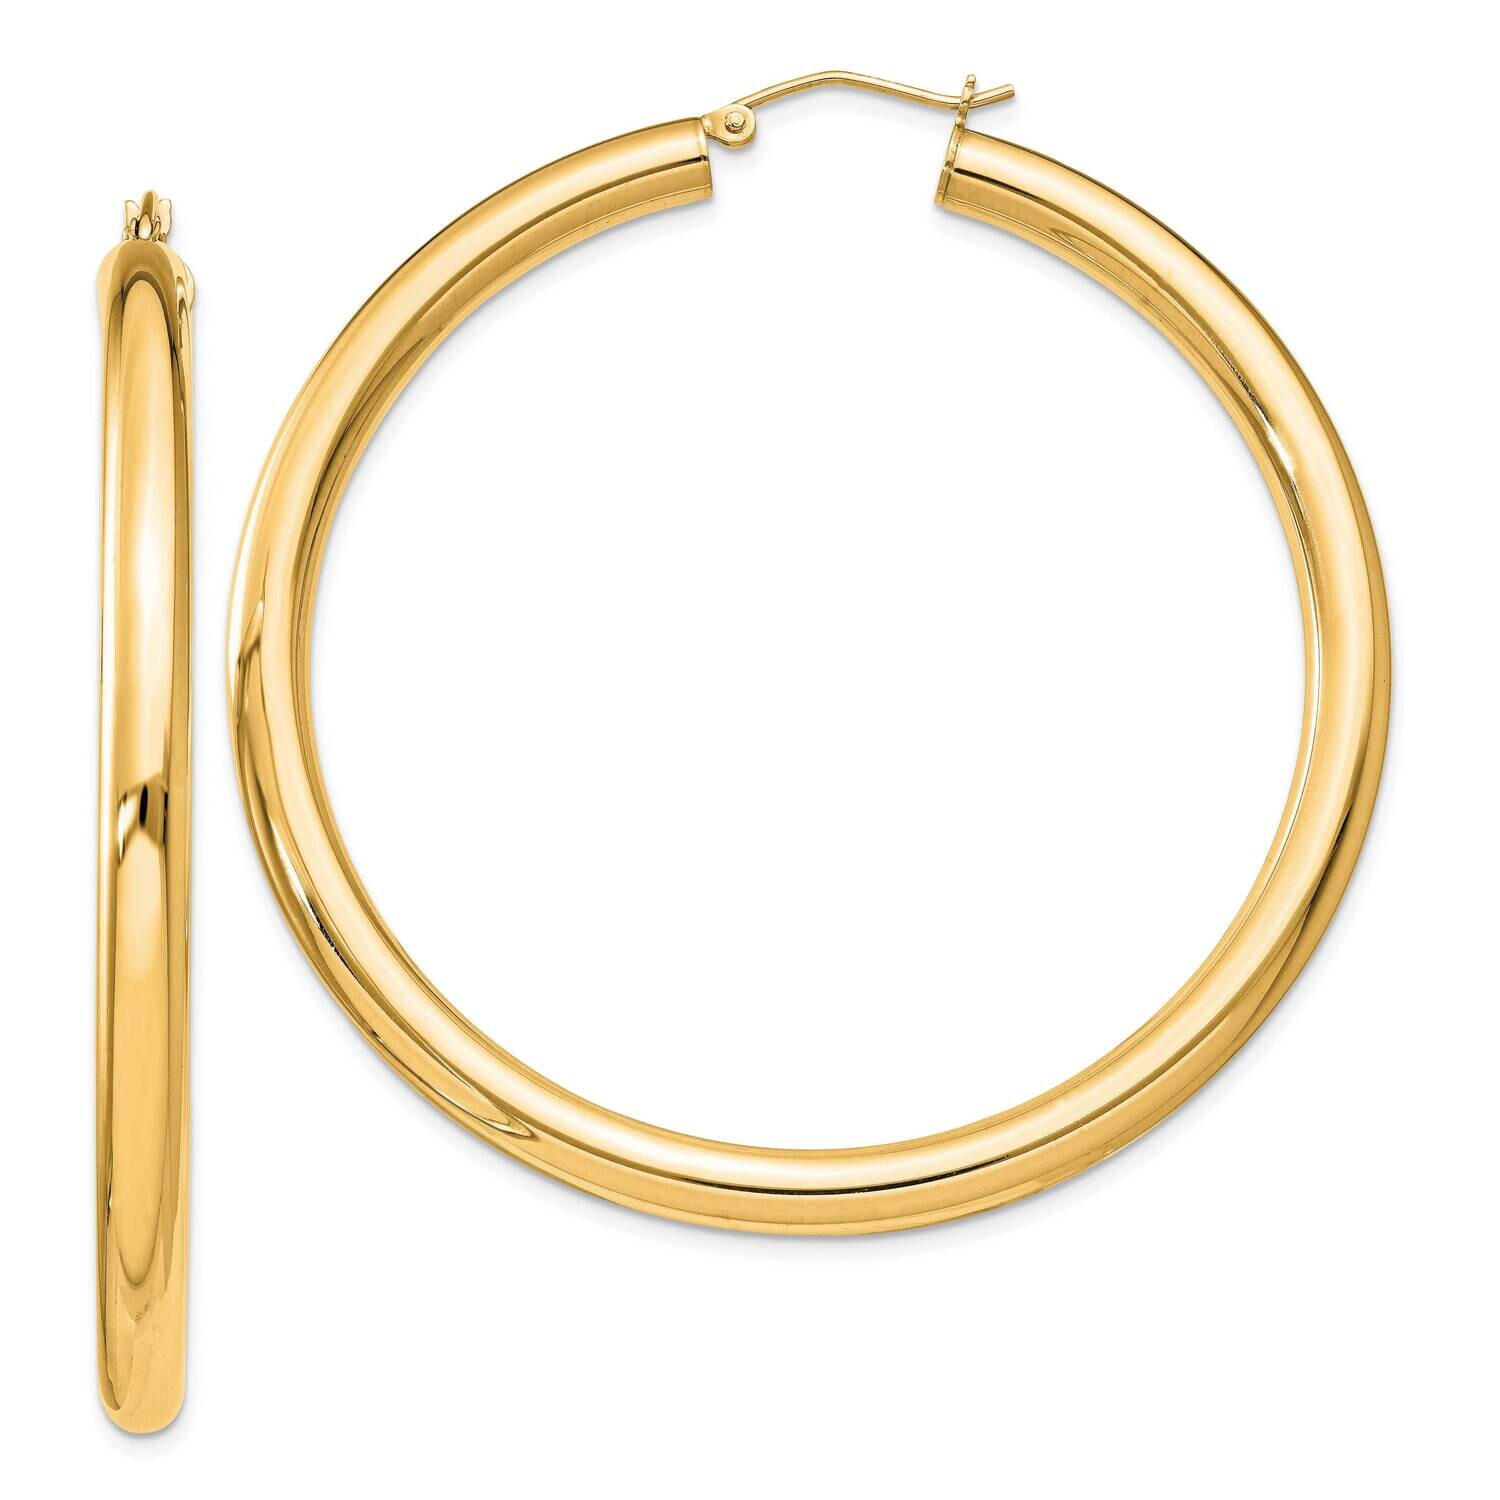 Flash Gold-Plated 4mm Round Hoop Earrings Sterling Silver QE819GP